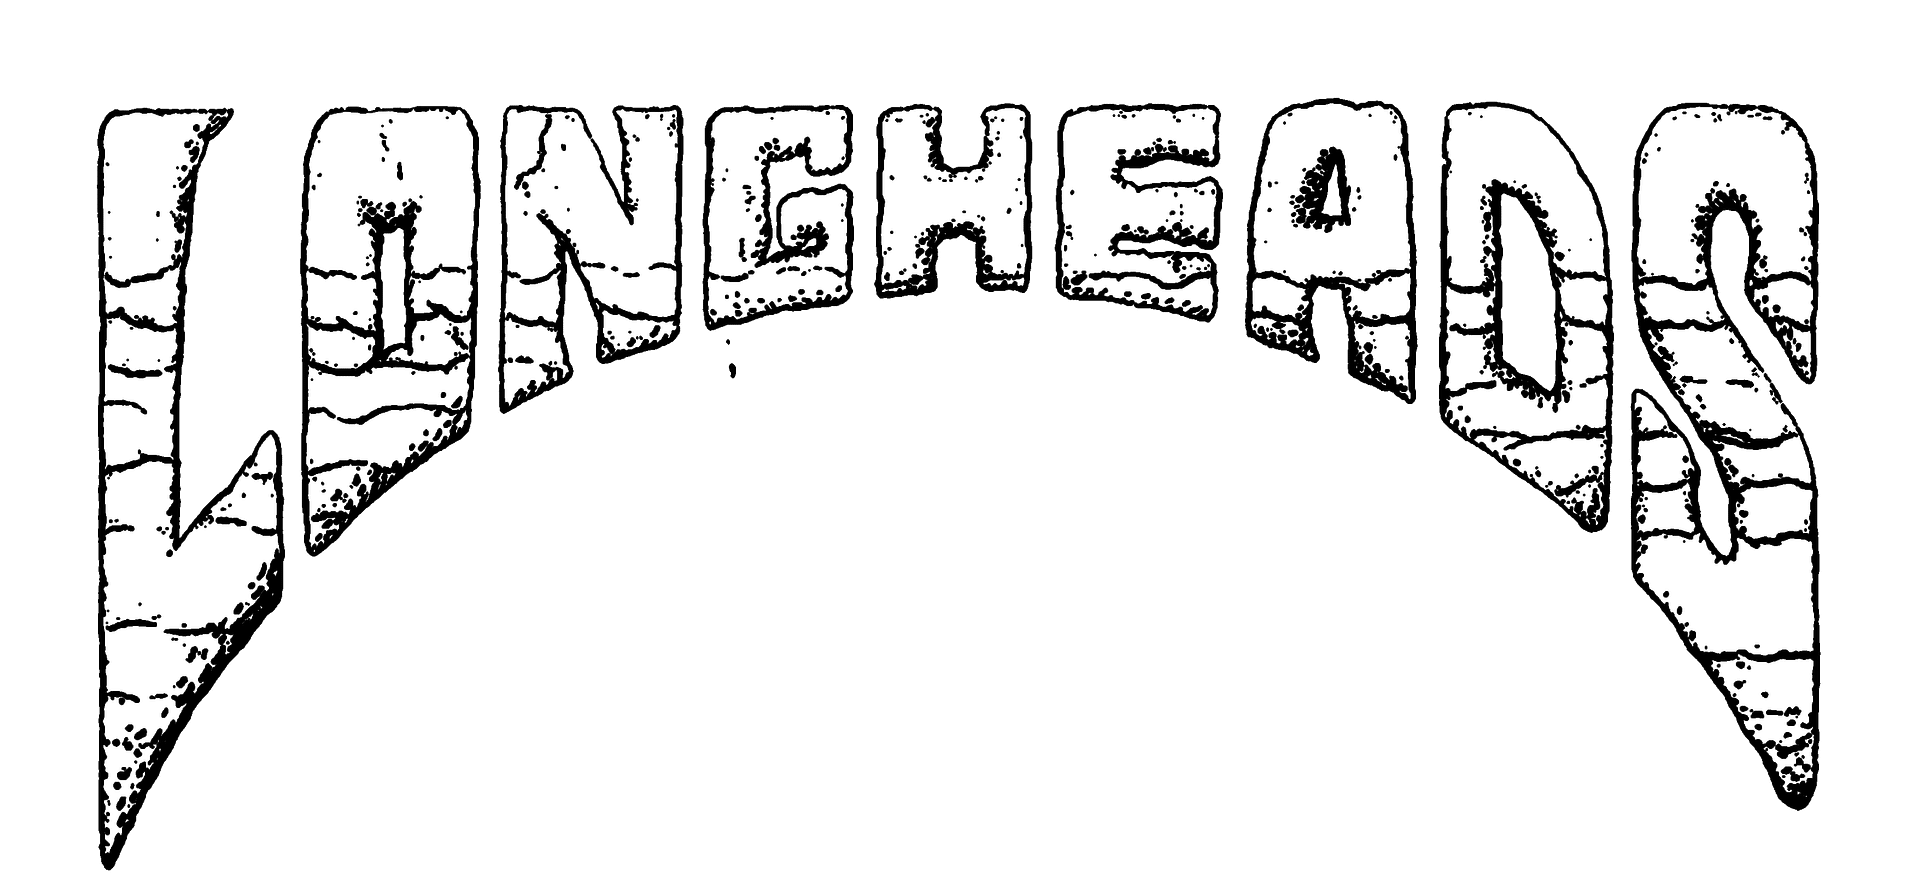 logo of the band called Longheads